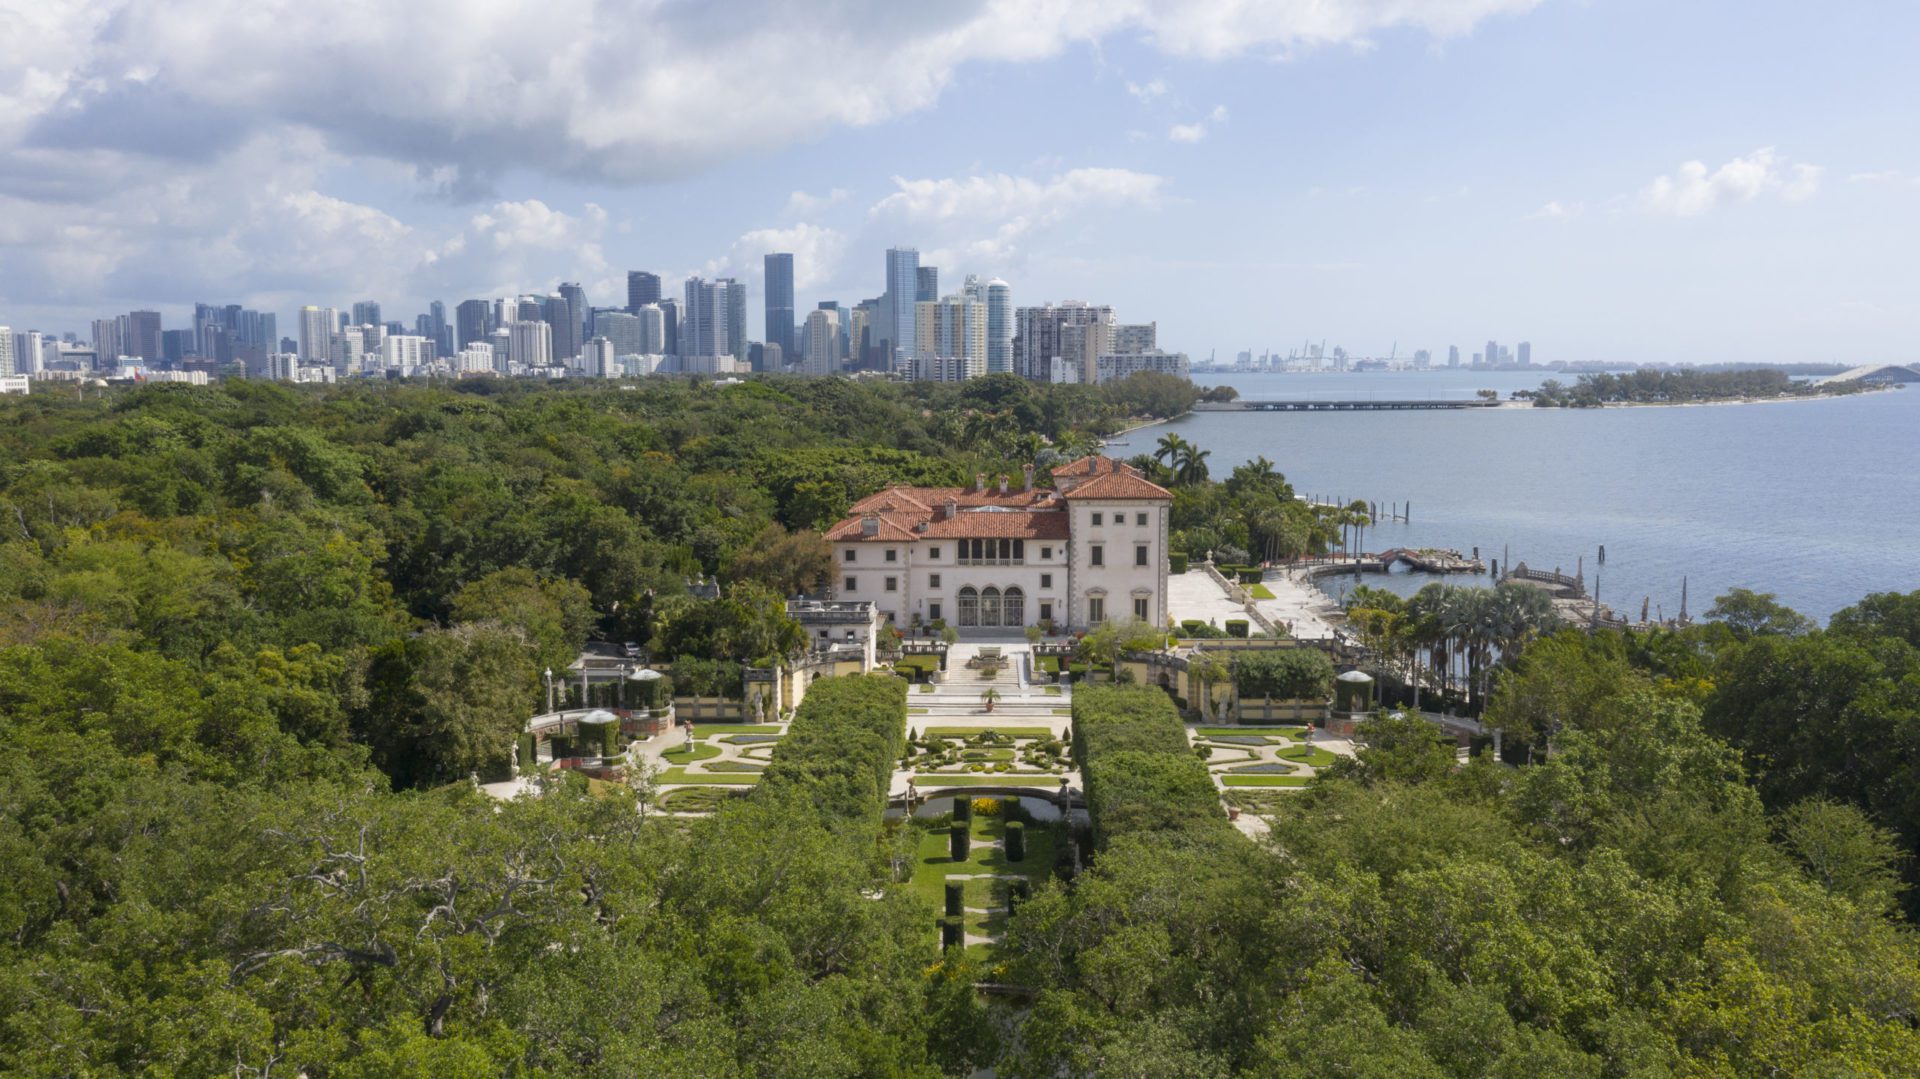 Aerial photo of Vizcaya's Main House surrounded by lush formal Italian gardens and views of downtown Miami in the background. Photo by Robin Hill